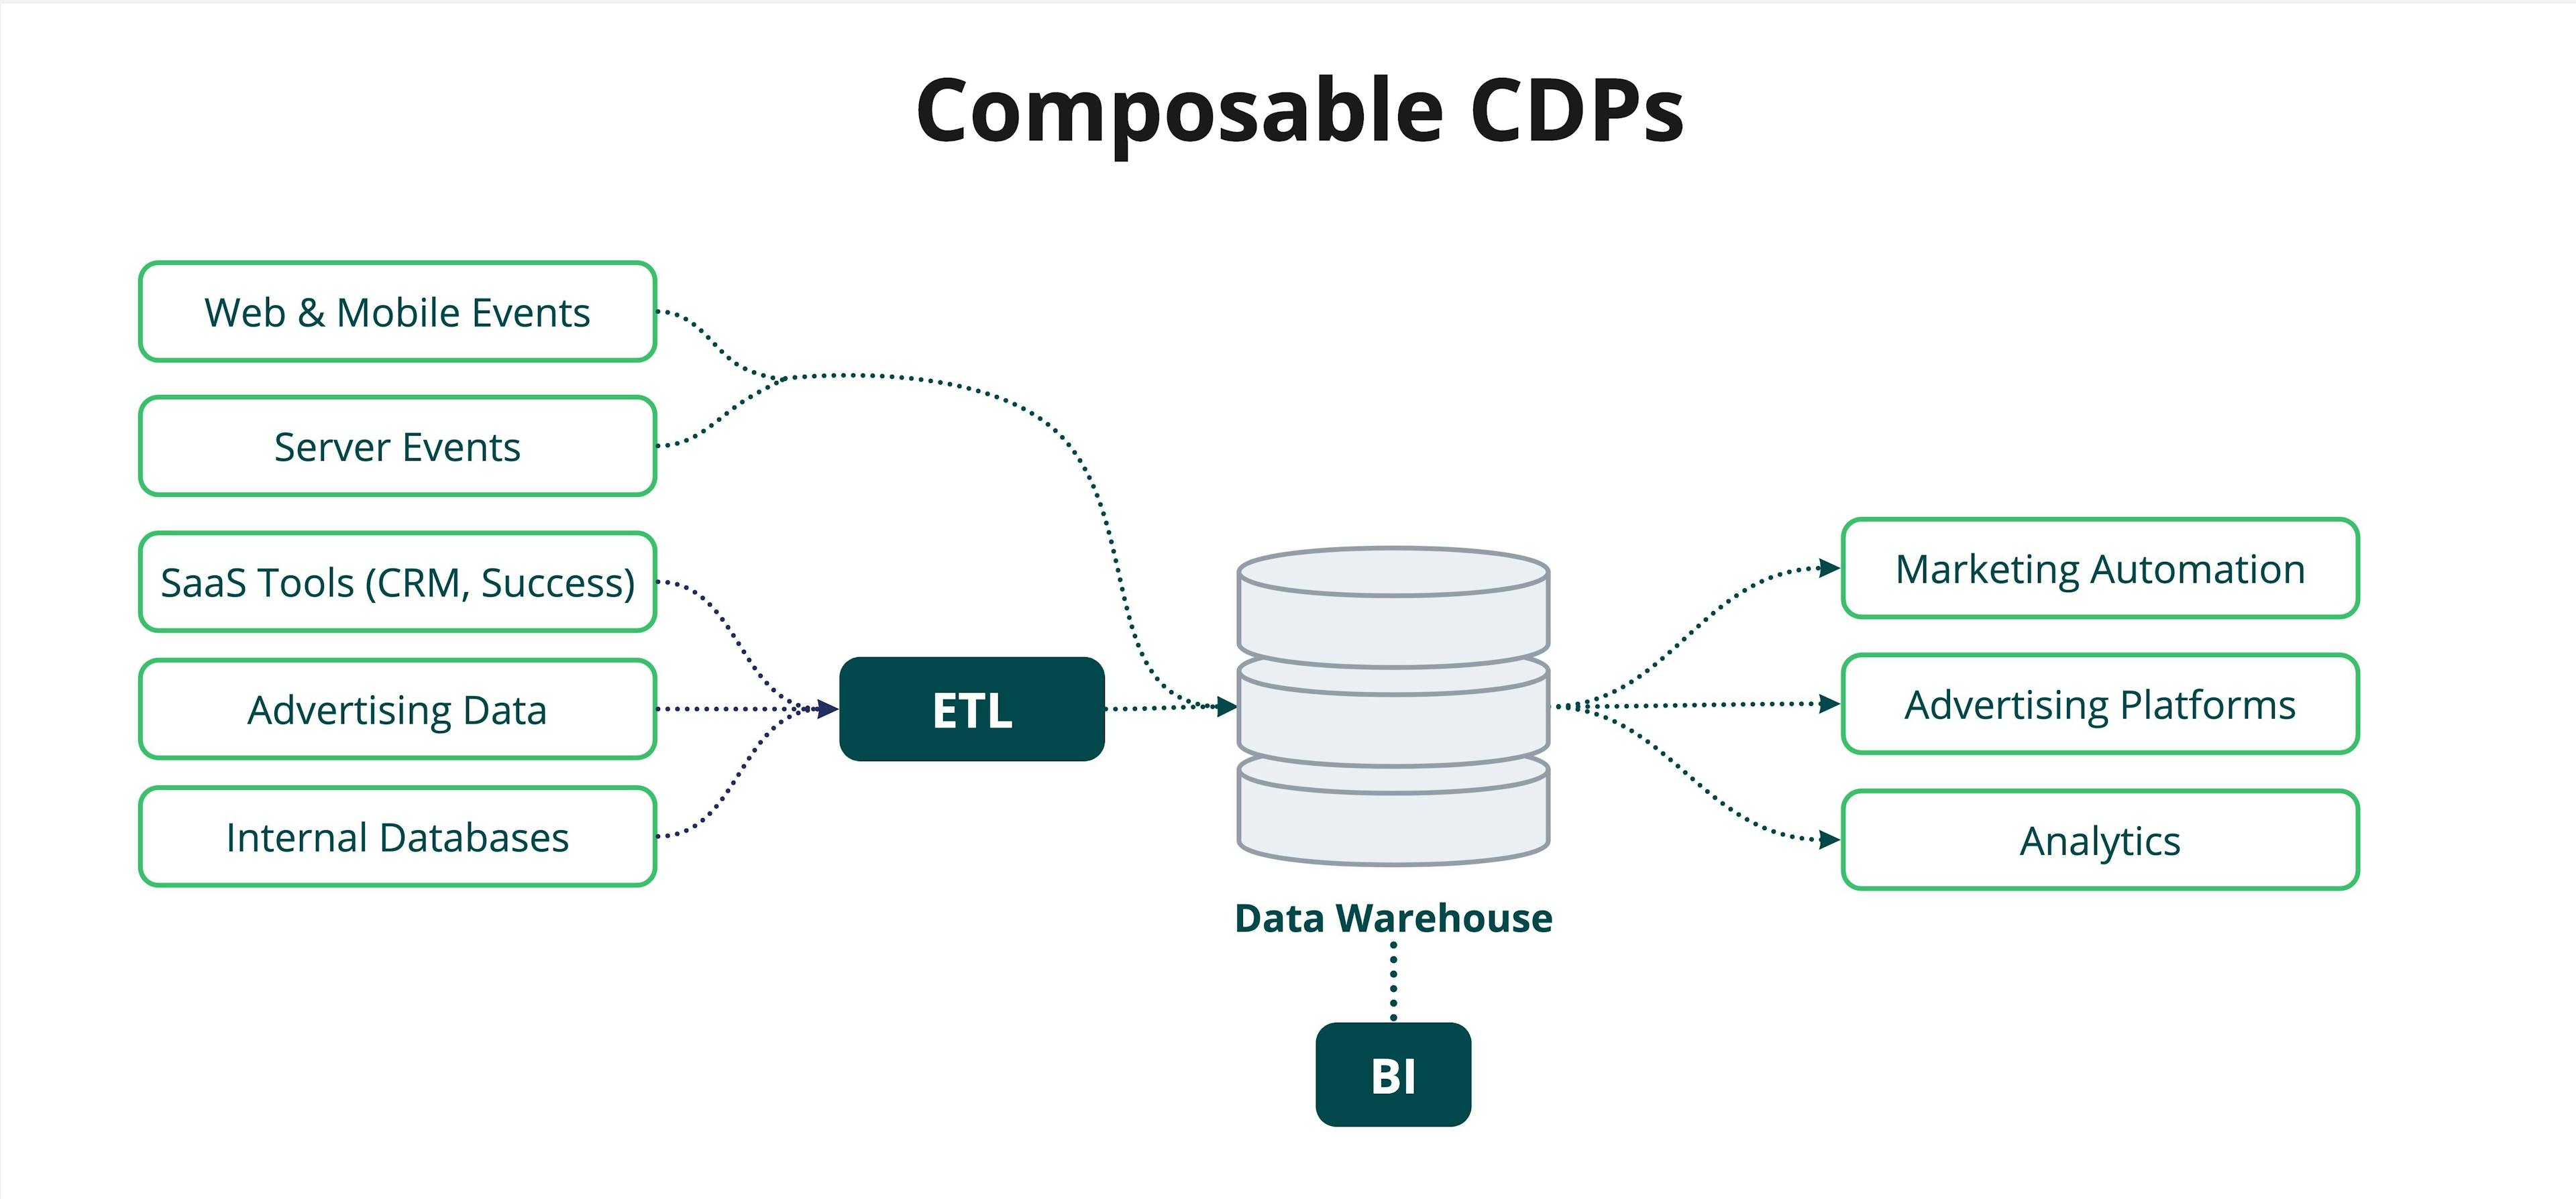 Composable CDPs